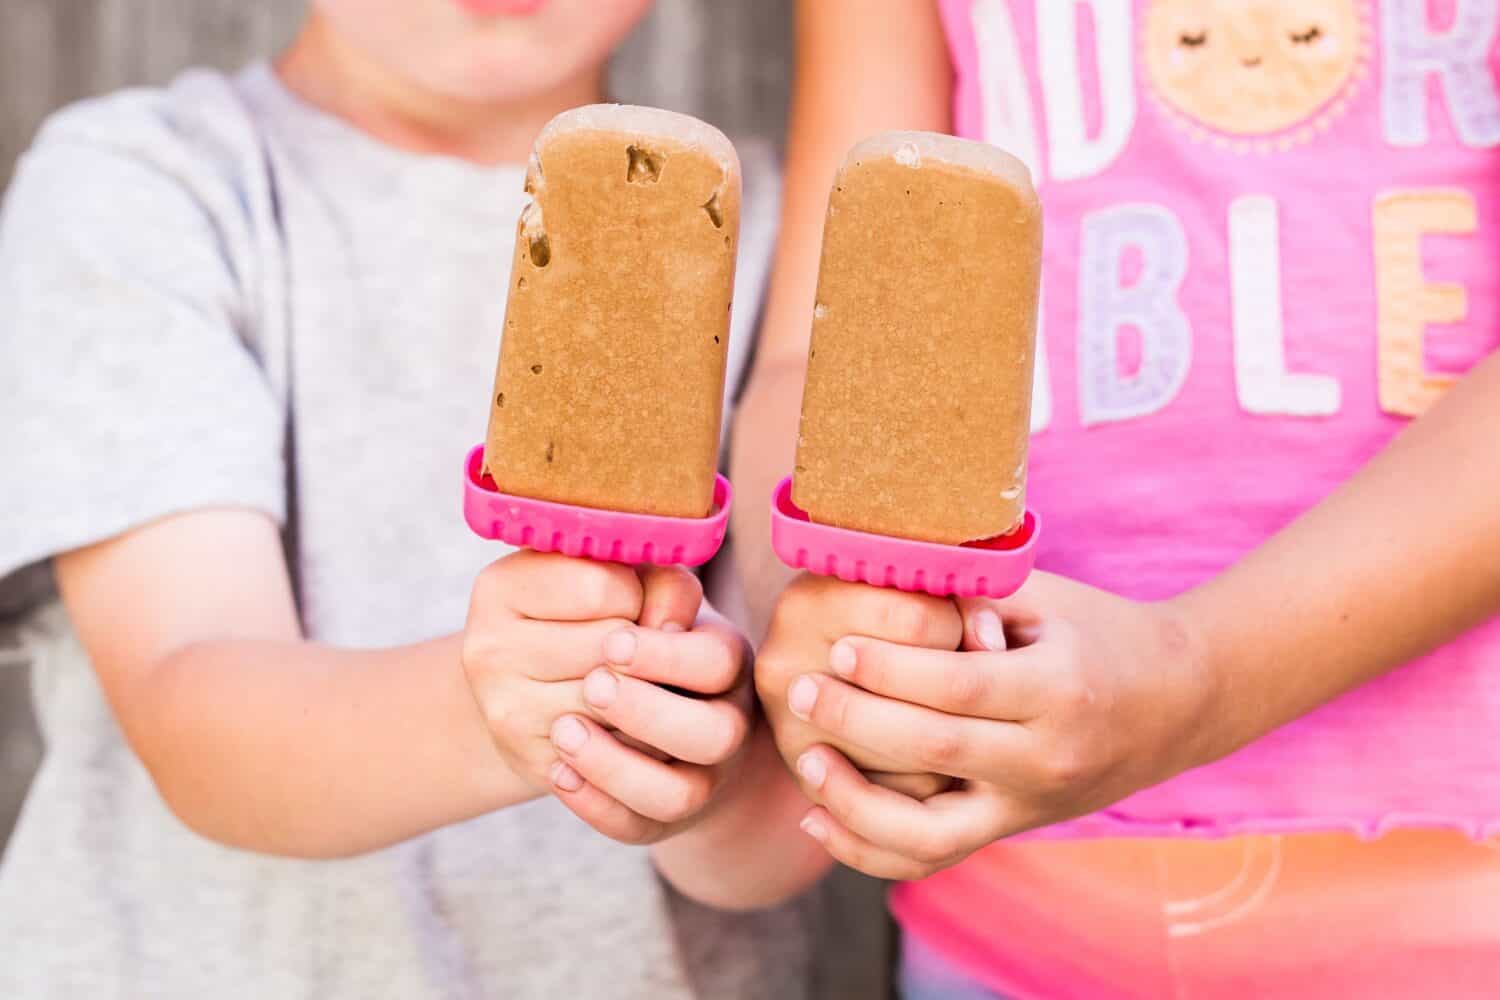 The kids holding homemade tasty frozen pudding pops on the blurred background